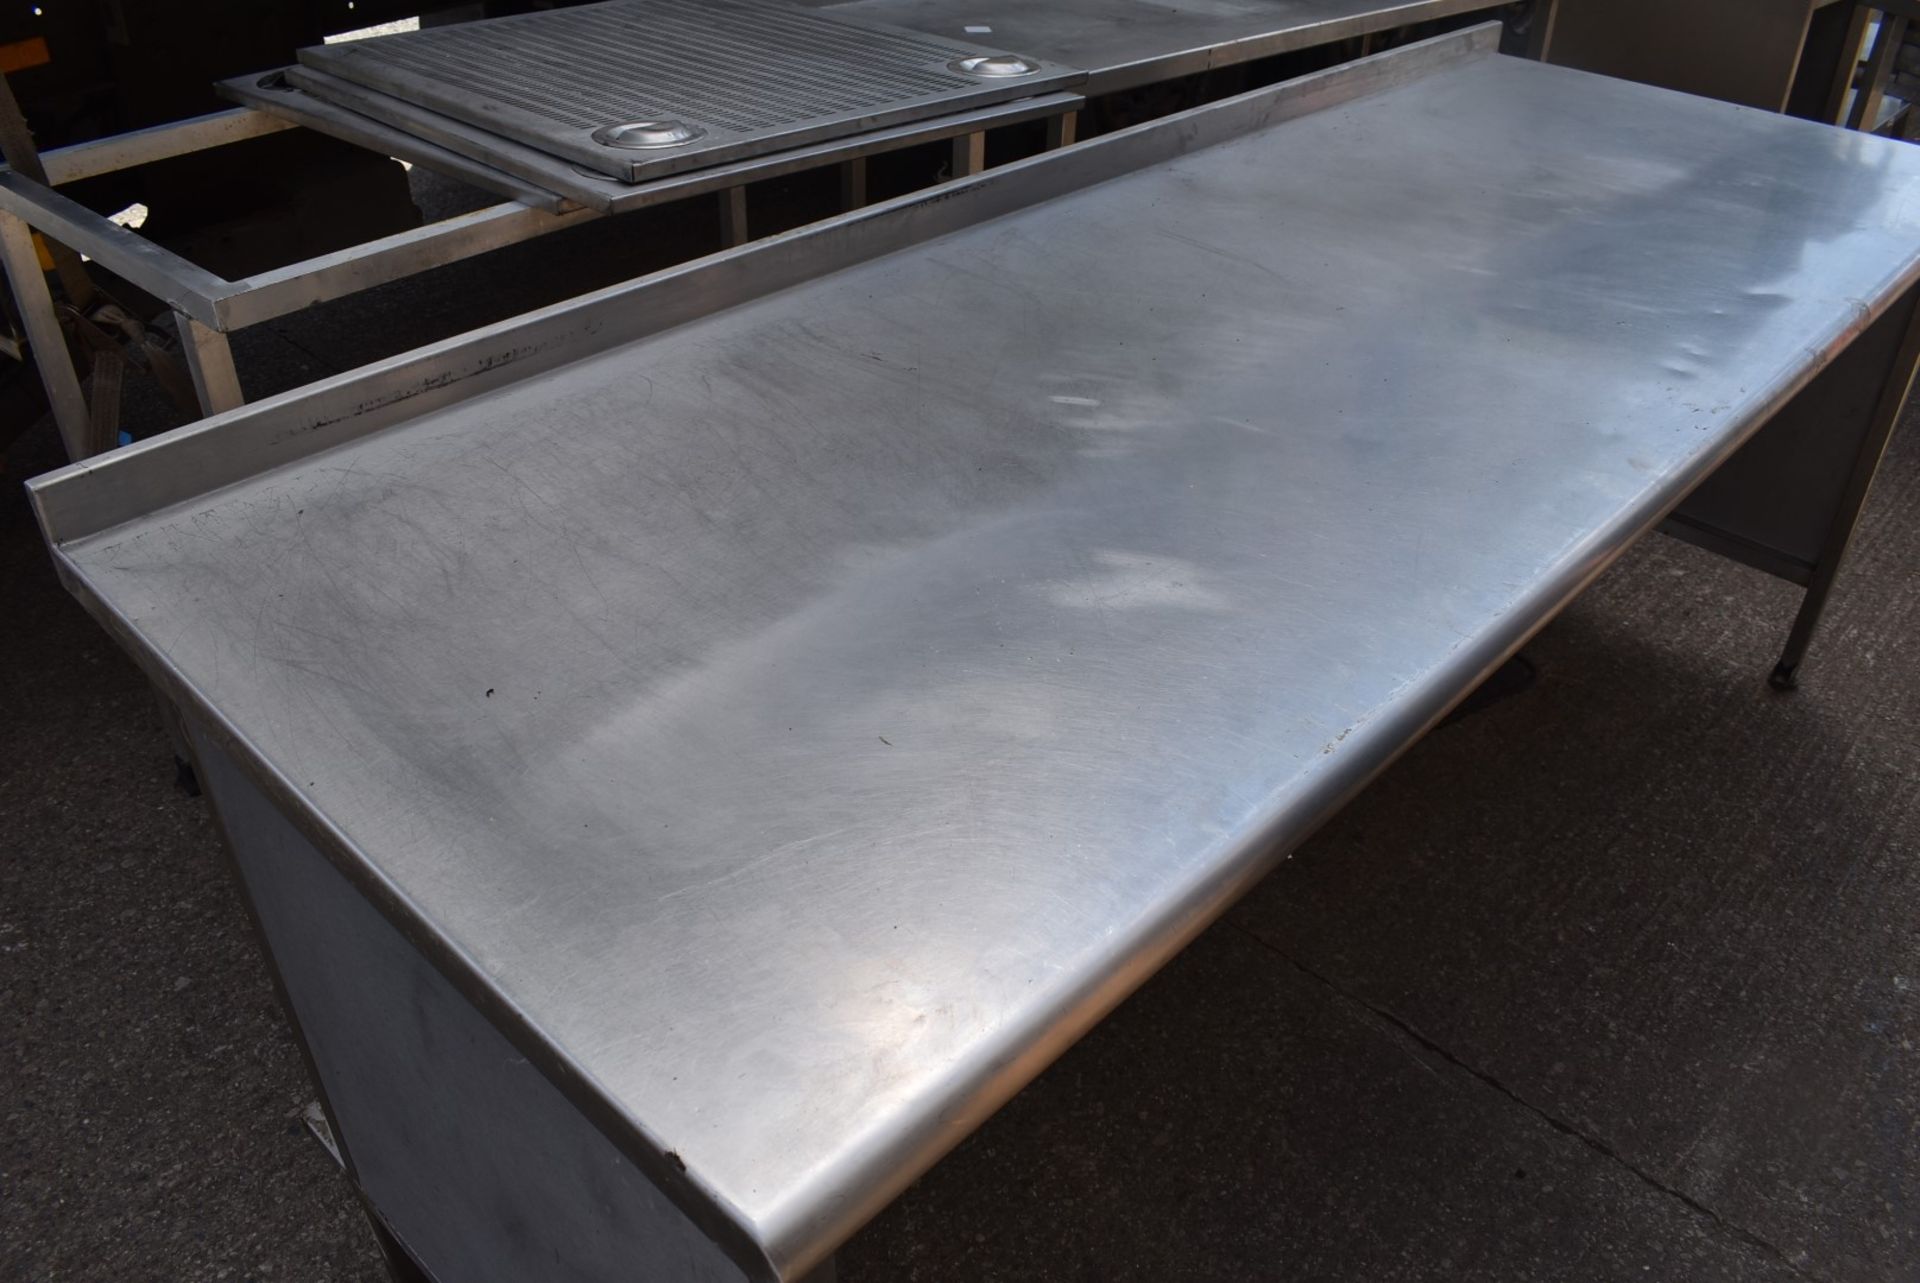 1 x Stainless Steel Prep Table With Closed Back and Sides - Dimensions: H87 x W200 x D80 cms - - Image 6 of 7